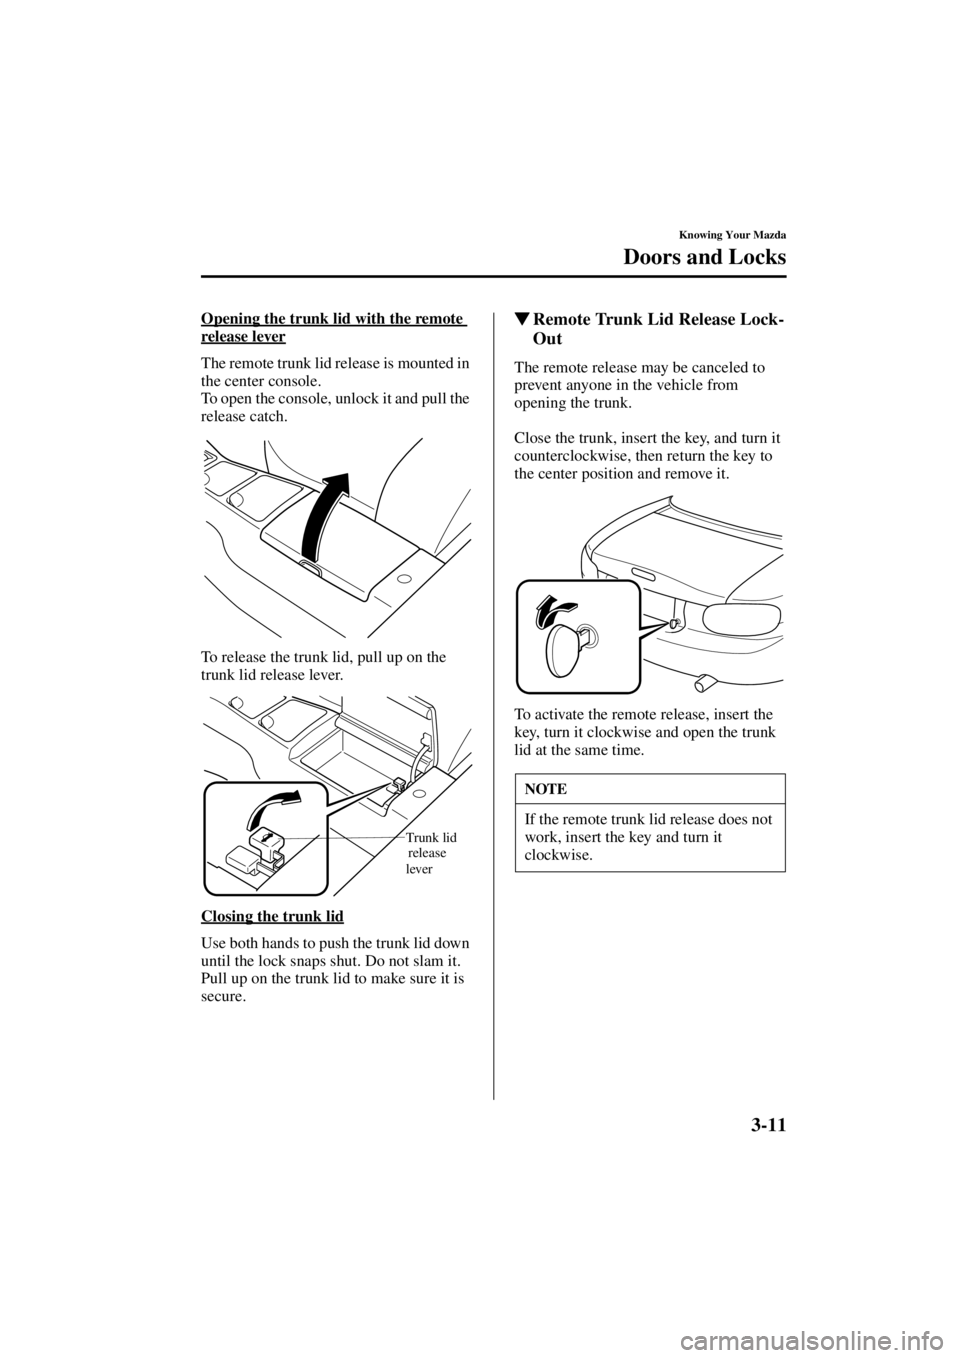 MAZDA MODEL SPEED MX-5 MIATA 2004  Owners Manual 3-11
Knowing Your Mazda
Doors and Locks
Form No. 8T02-EA-03L
Opening the trunk lid with the remote 
release lever
The remote trunk lid release is mounted in 
the center console.
To open the console, u